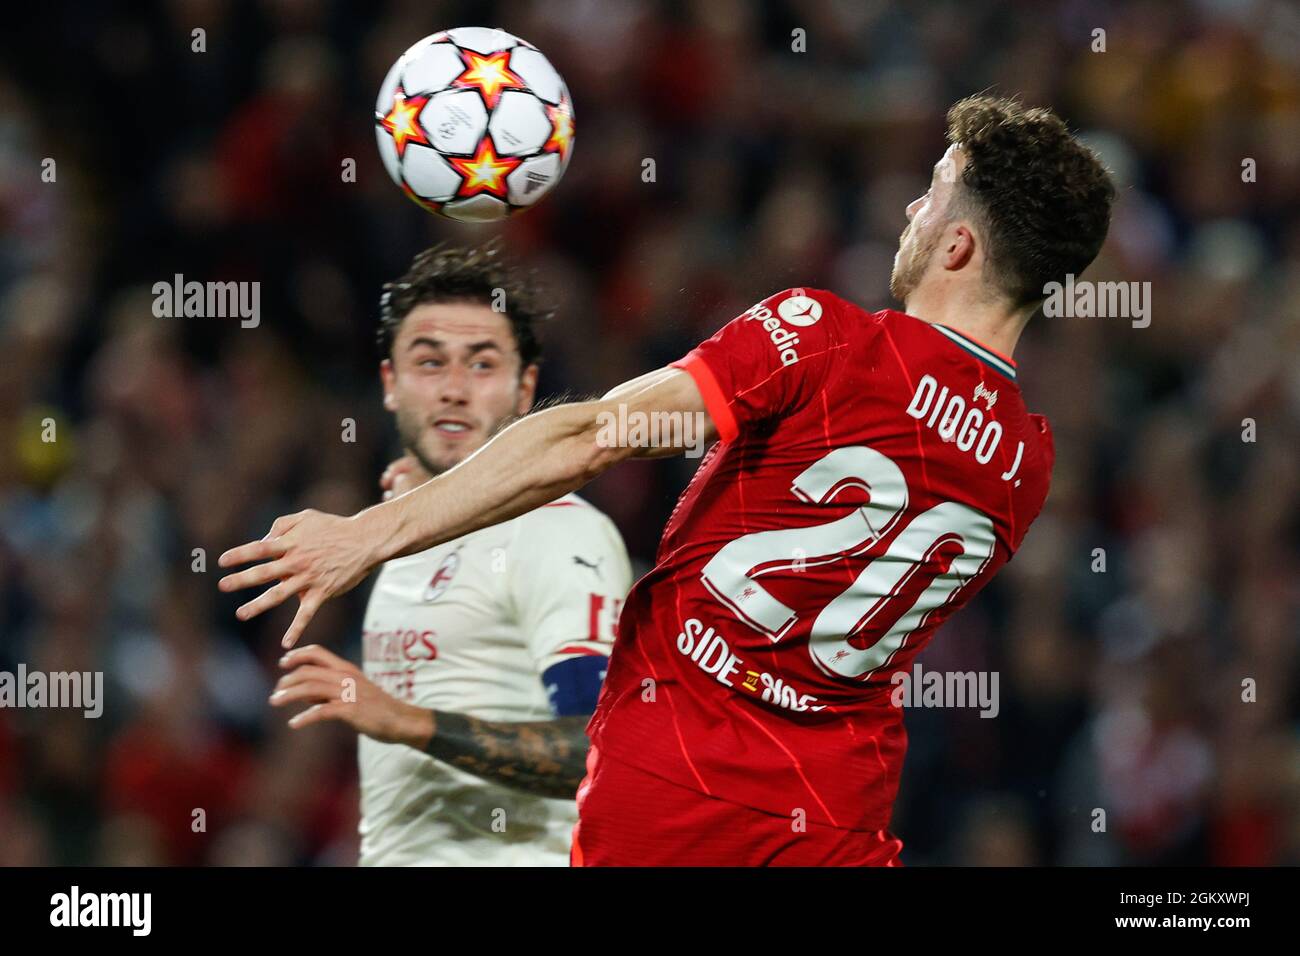 Liverpool, UK. 15th Sep, 2021. Diogo Jota (Liverpool FC) controls the ball  in mid air during Group B - Liverpool FC vs AC Milan, UEFA Champions League  football match in Liverpool, England,